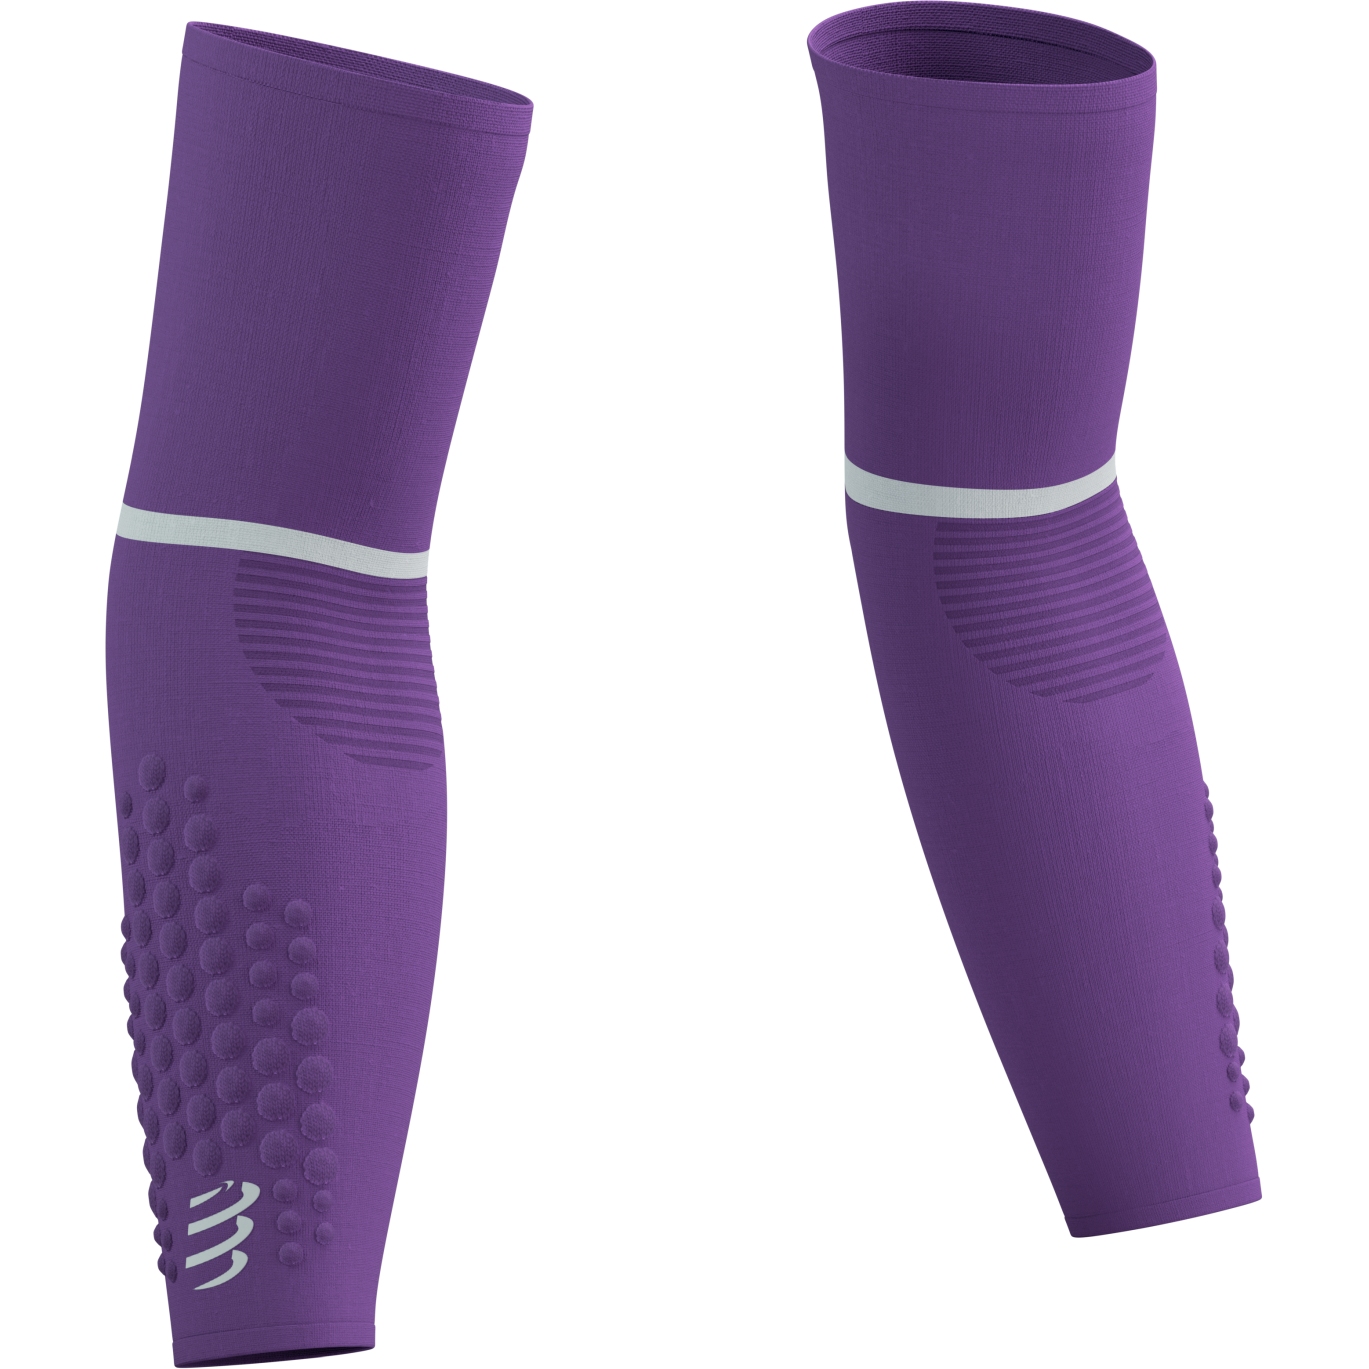 Picture of Compressport ArmForce Ultralight Compression Sleeves - royal lilac/white